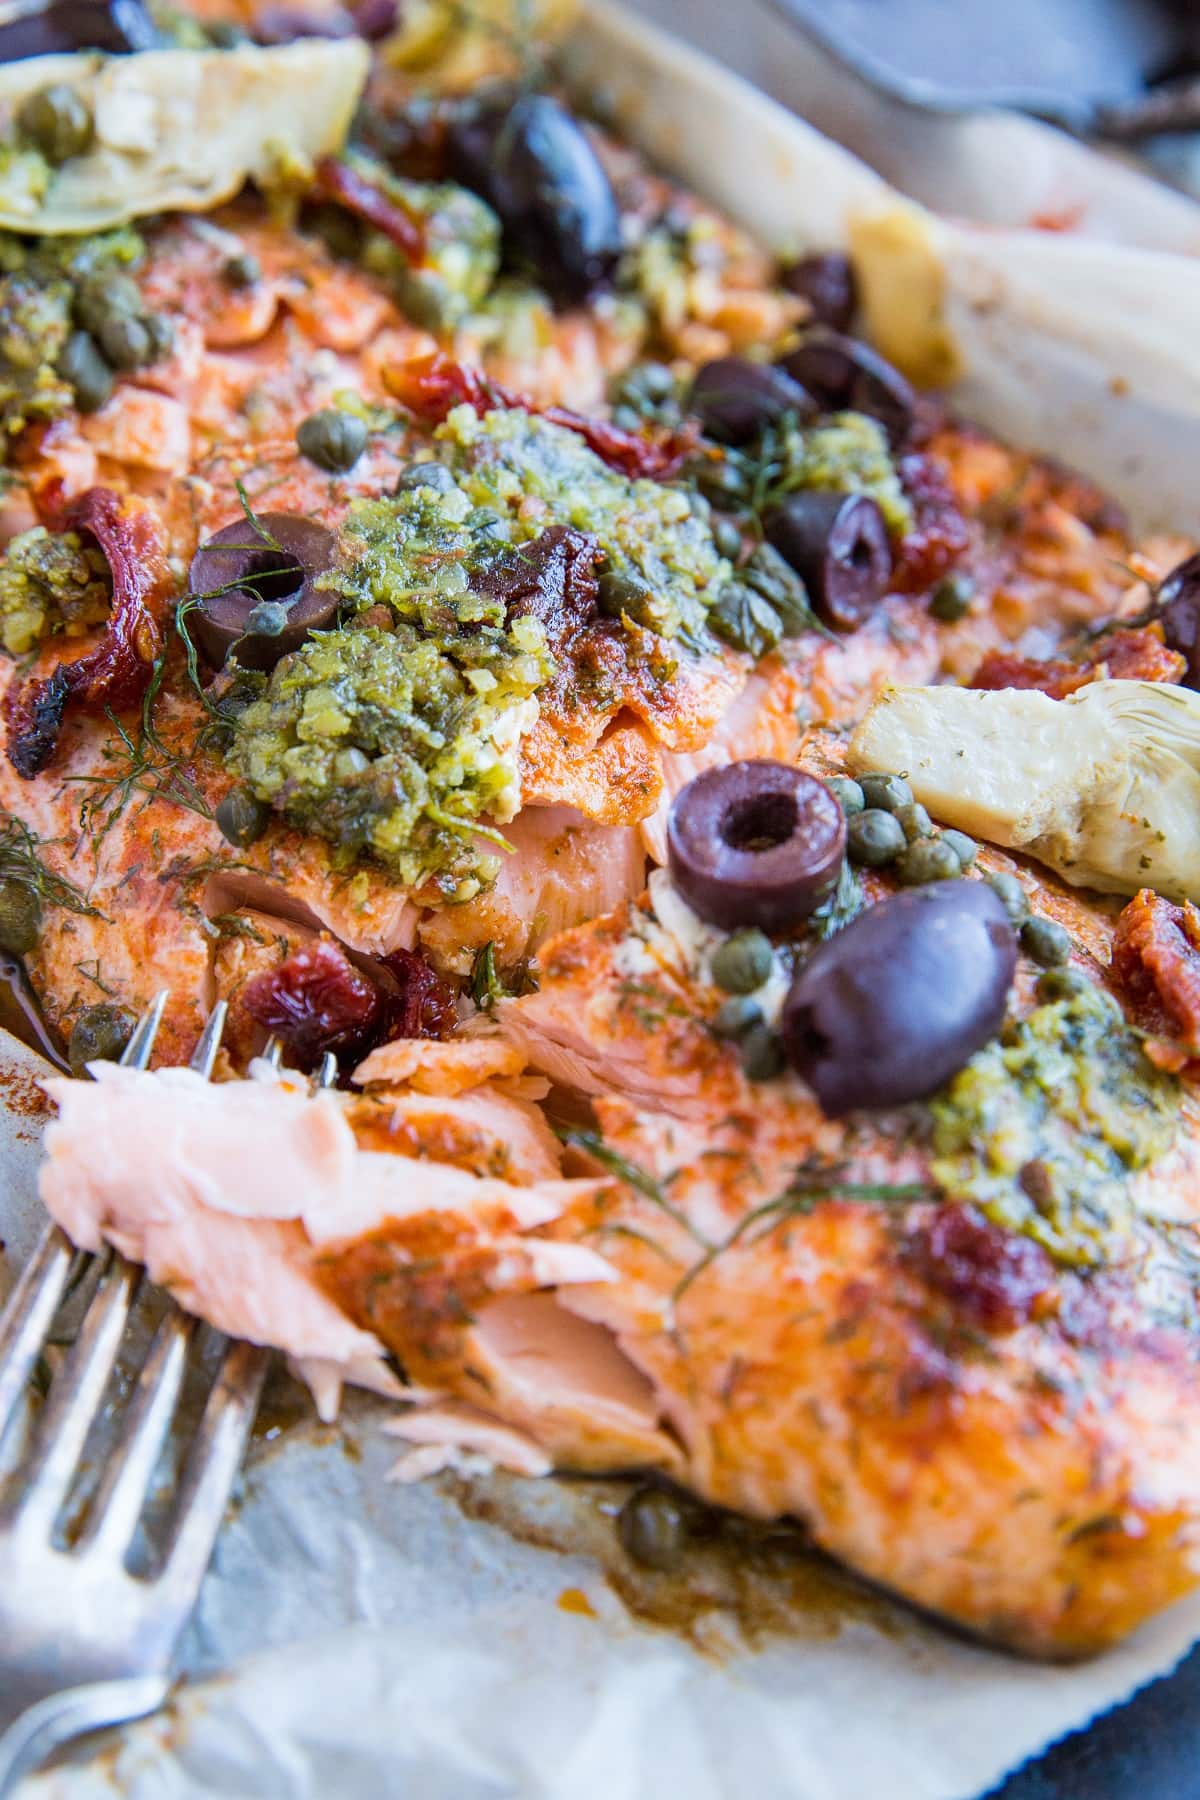 Mediterranean Salmon in Parchment Paper - paleo, keto, low-carb, amazingly flavorful dinner recipe! This salmon with pesto, kalamata olives, capers, sun-dried tomatoes, and artichoke hearts is an epic crowd pleaser!